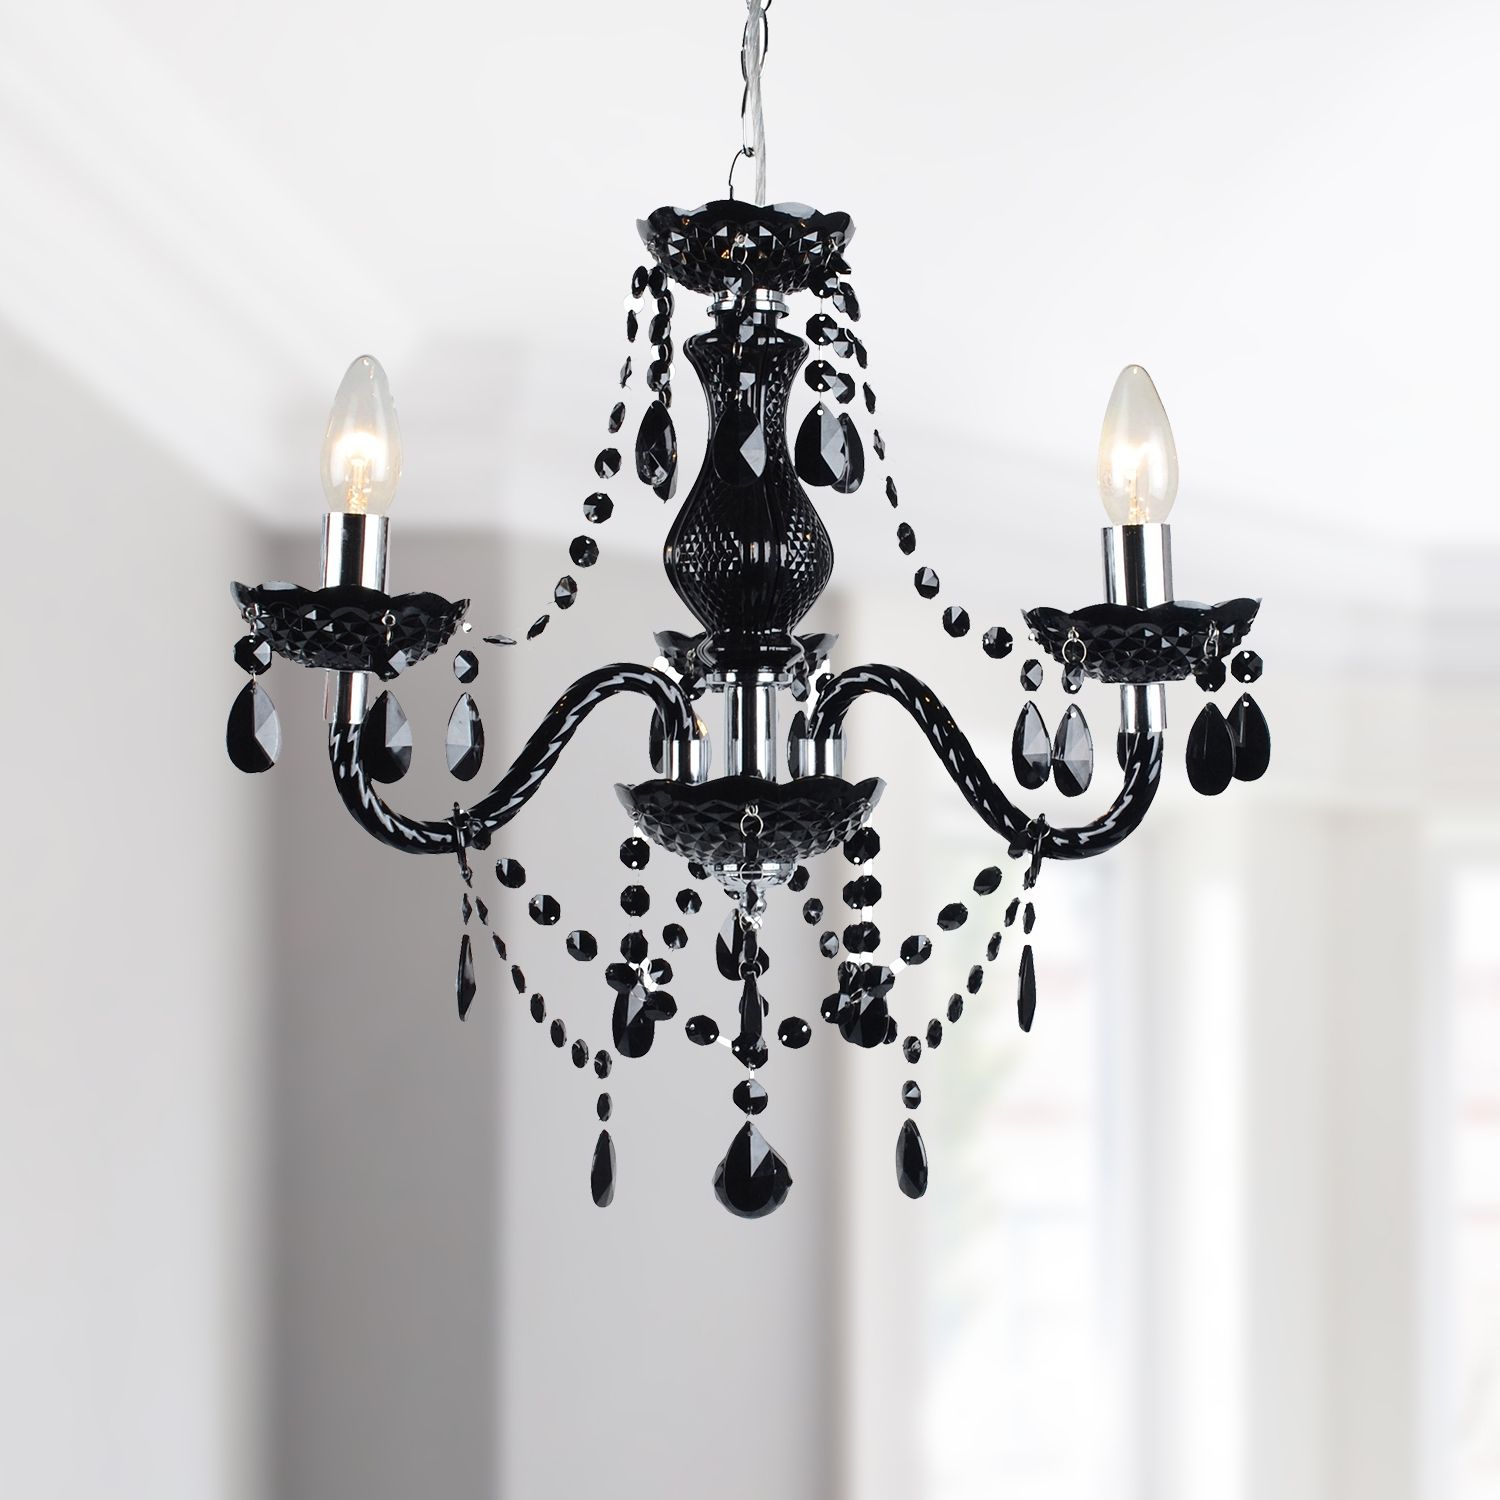 3 Light Pendant Chandeliers Intended For Most Up To Date Modern Classic Black & Chrome Marie Therese 3 Light (View 14 of 20)